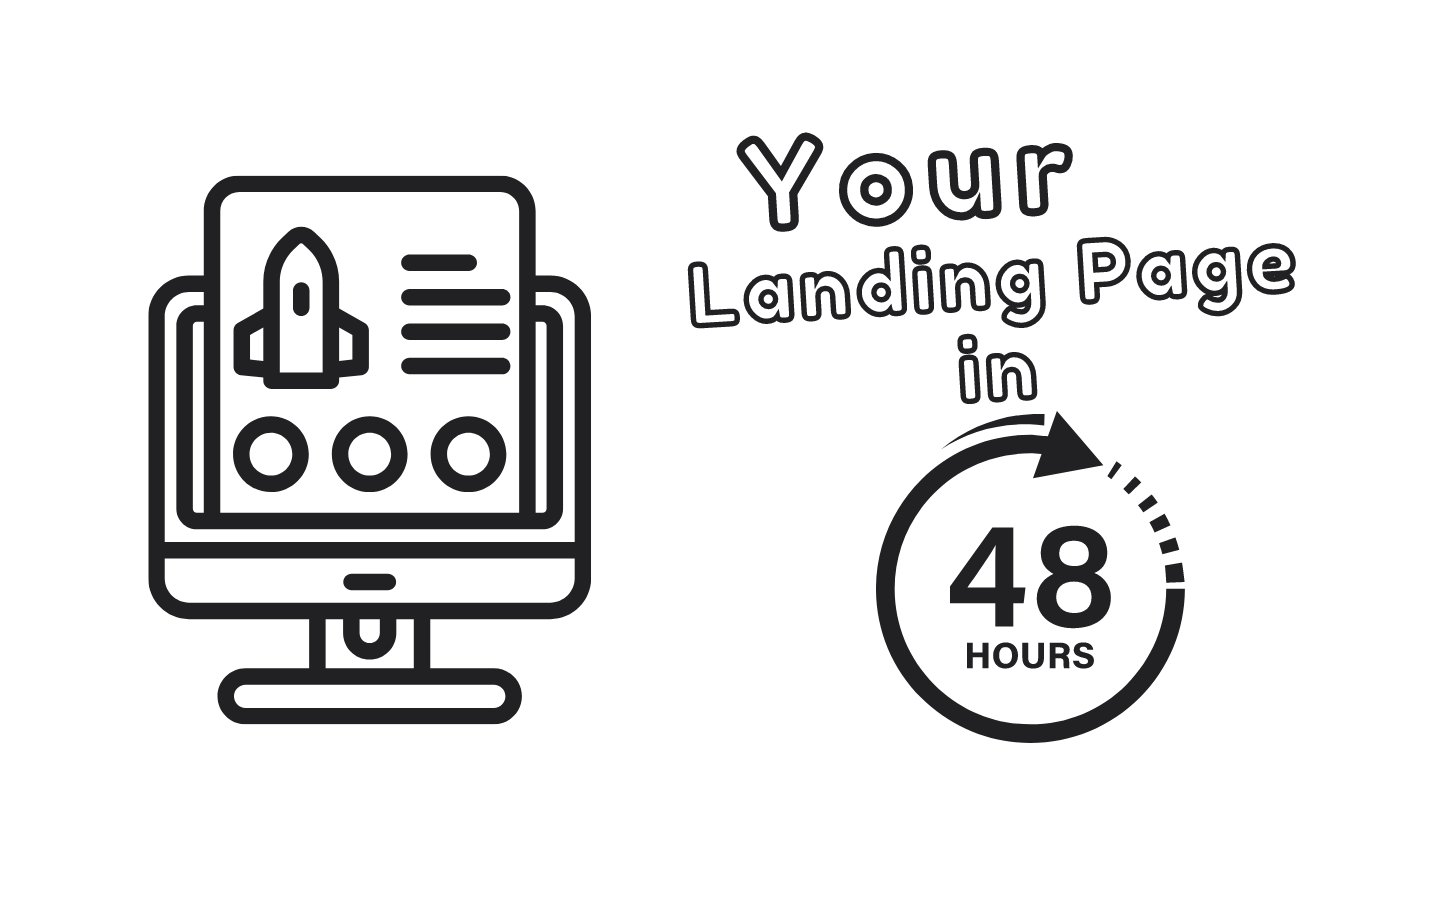 Get Your Landing Page in 2 Days